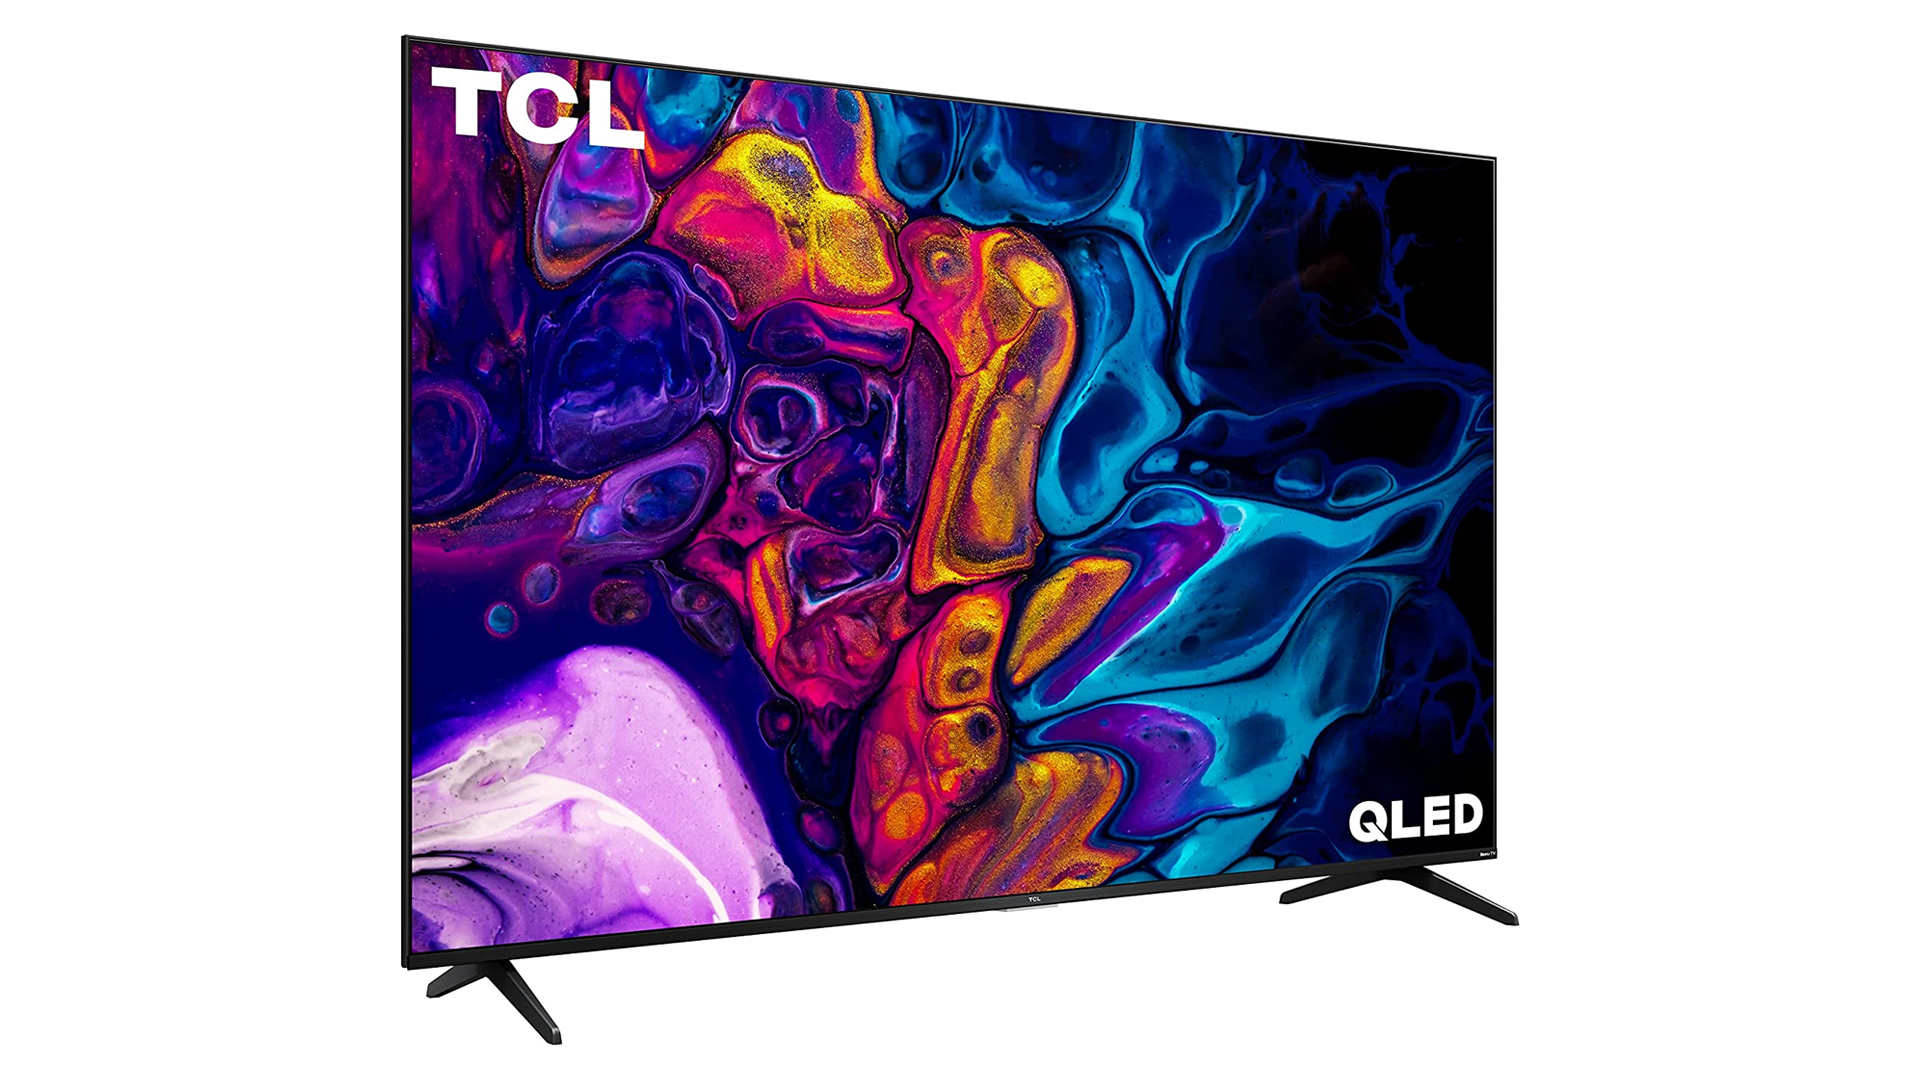 Product image of the Roku 2022 TCL Class 5 TV.